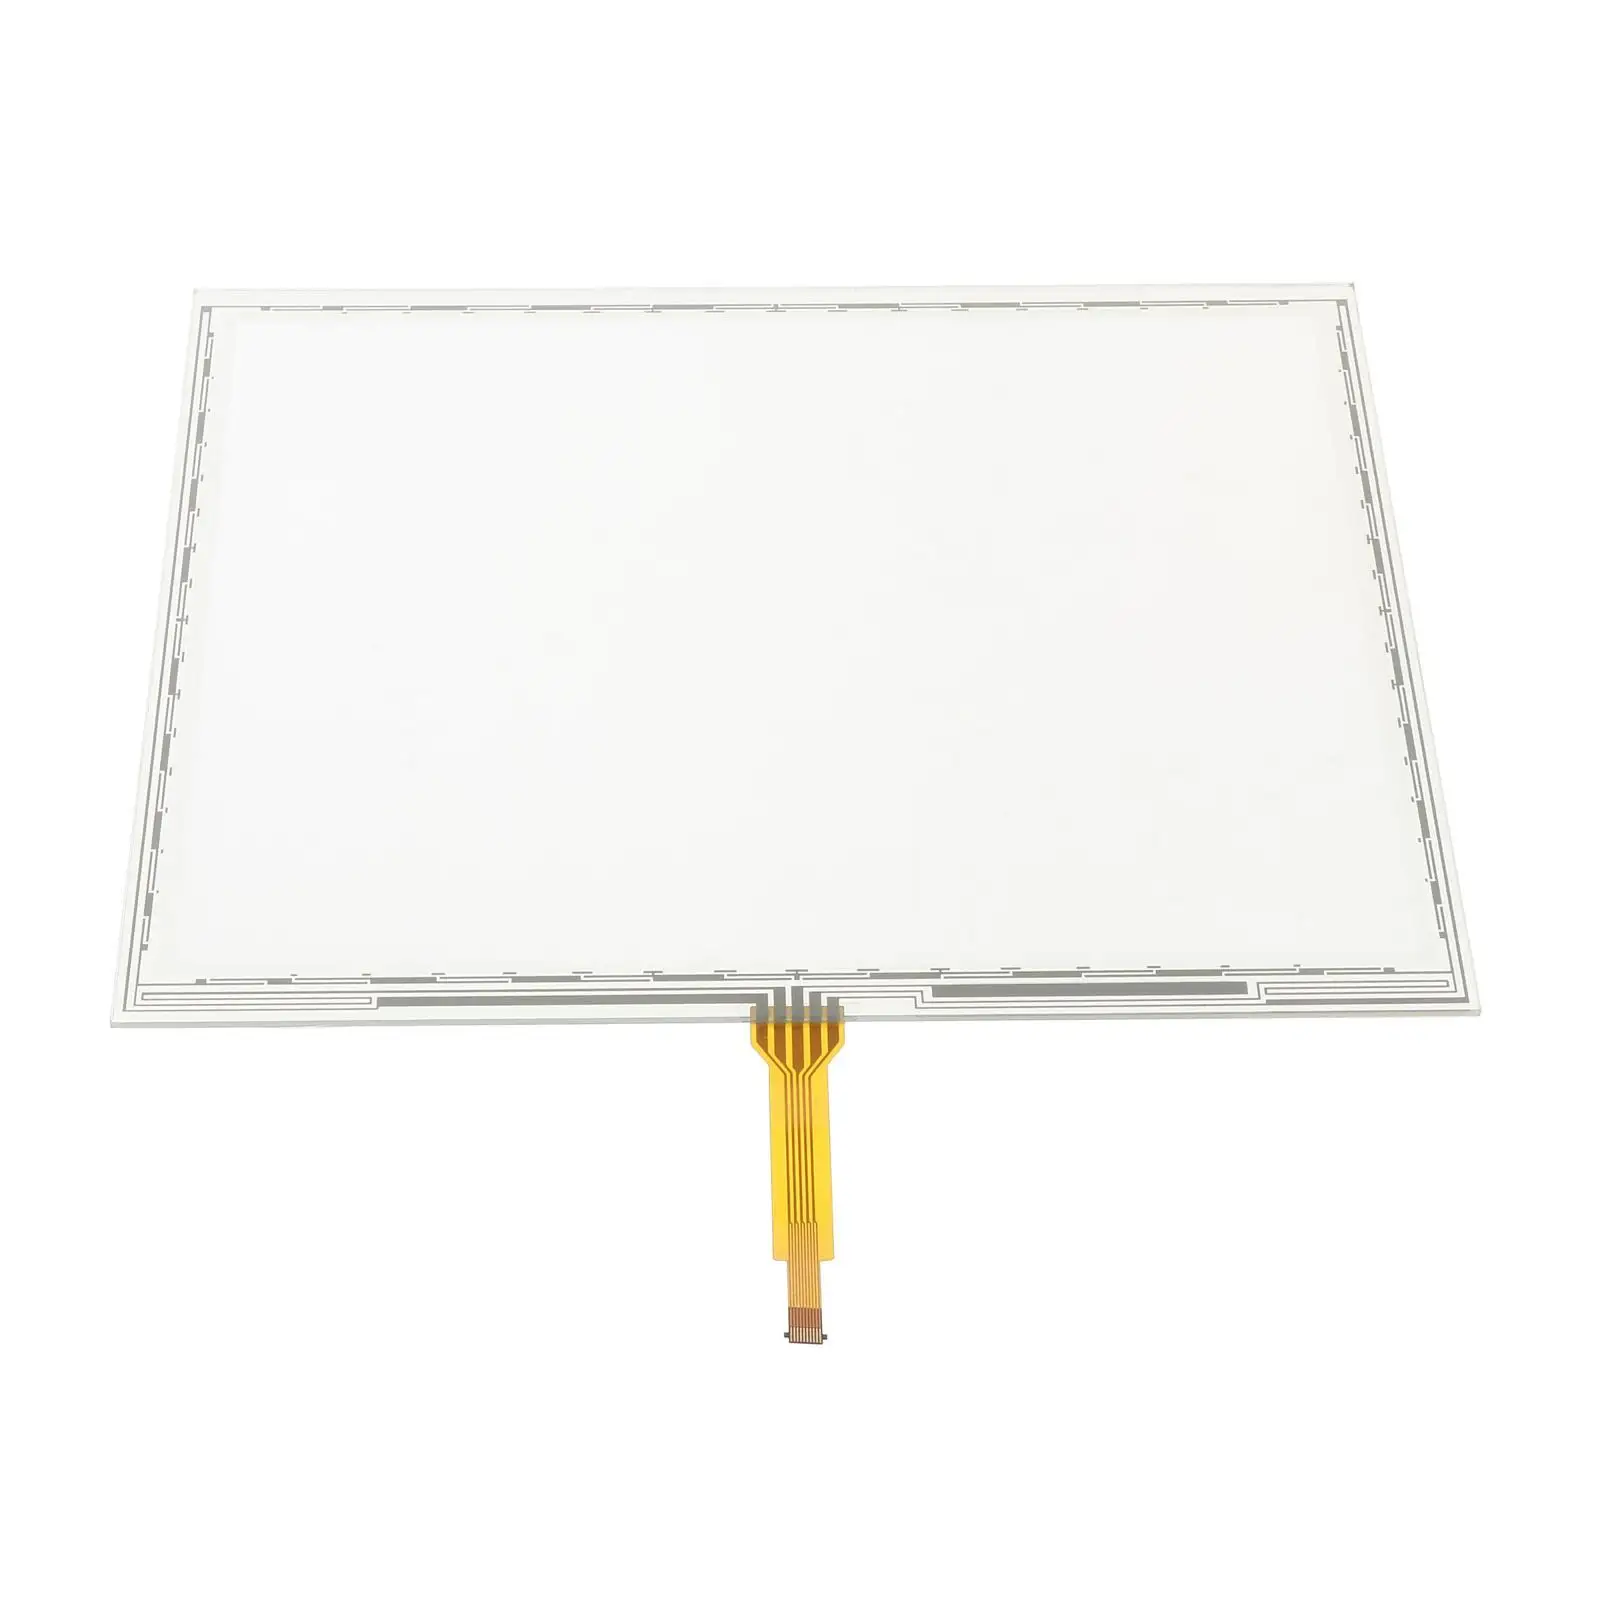 LCD Display Touch Screen Panel Fpc-863Ne 9.09inchx7.17inch Digital Panel for 4640 Repair Parts High Precision Direct Mount